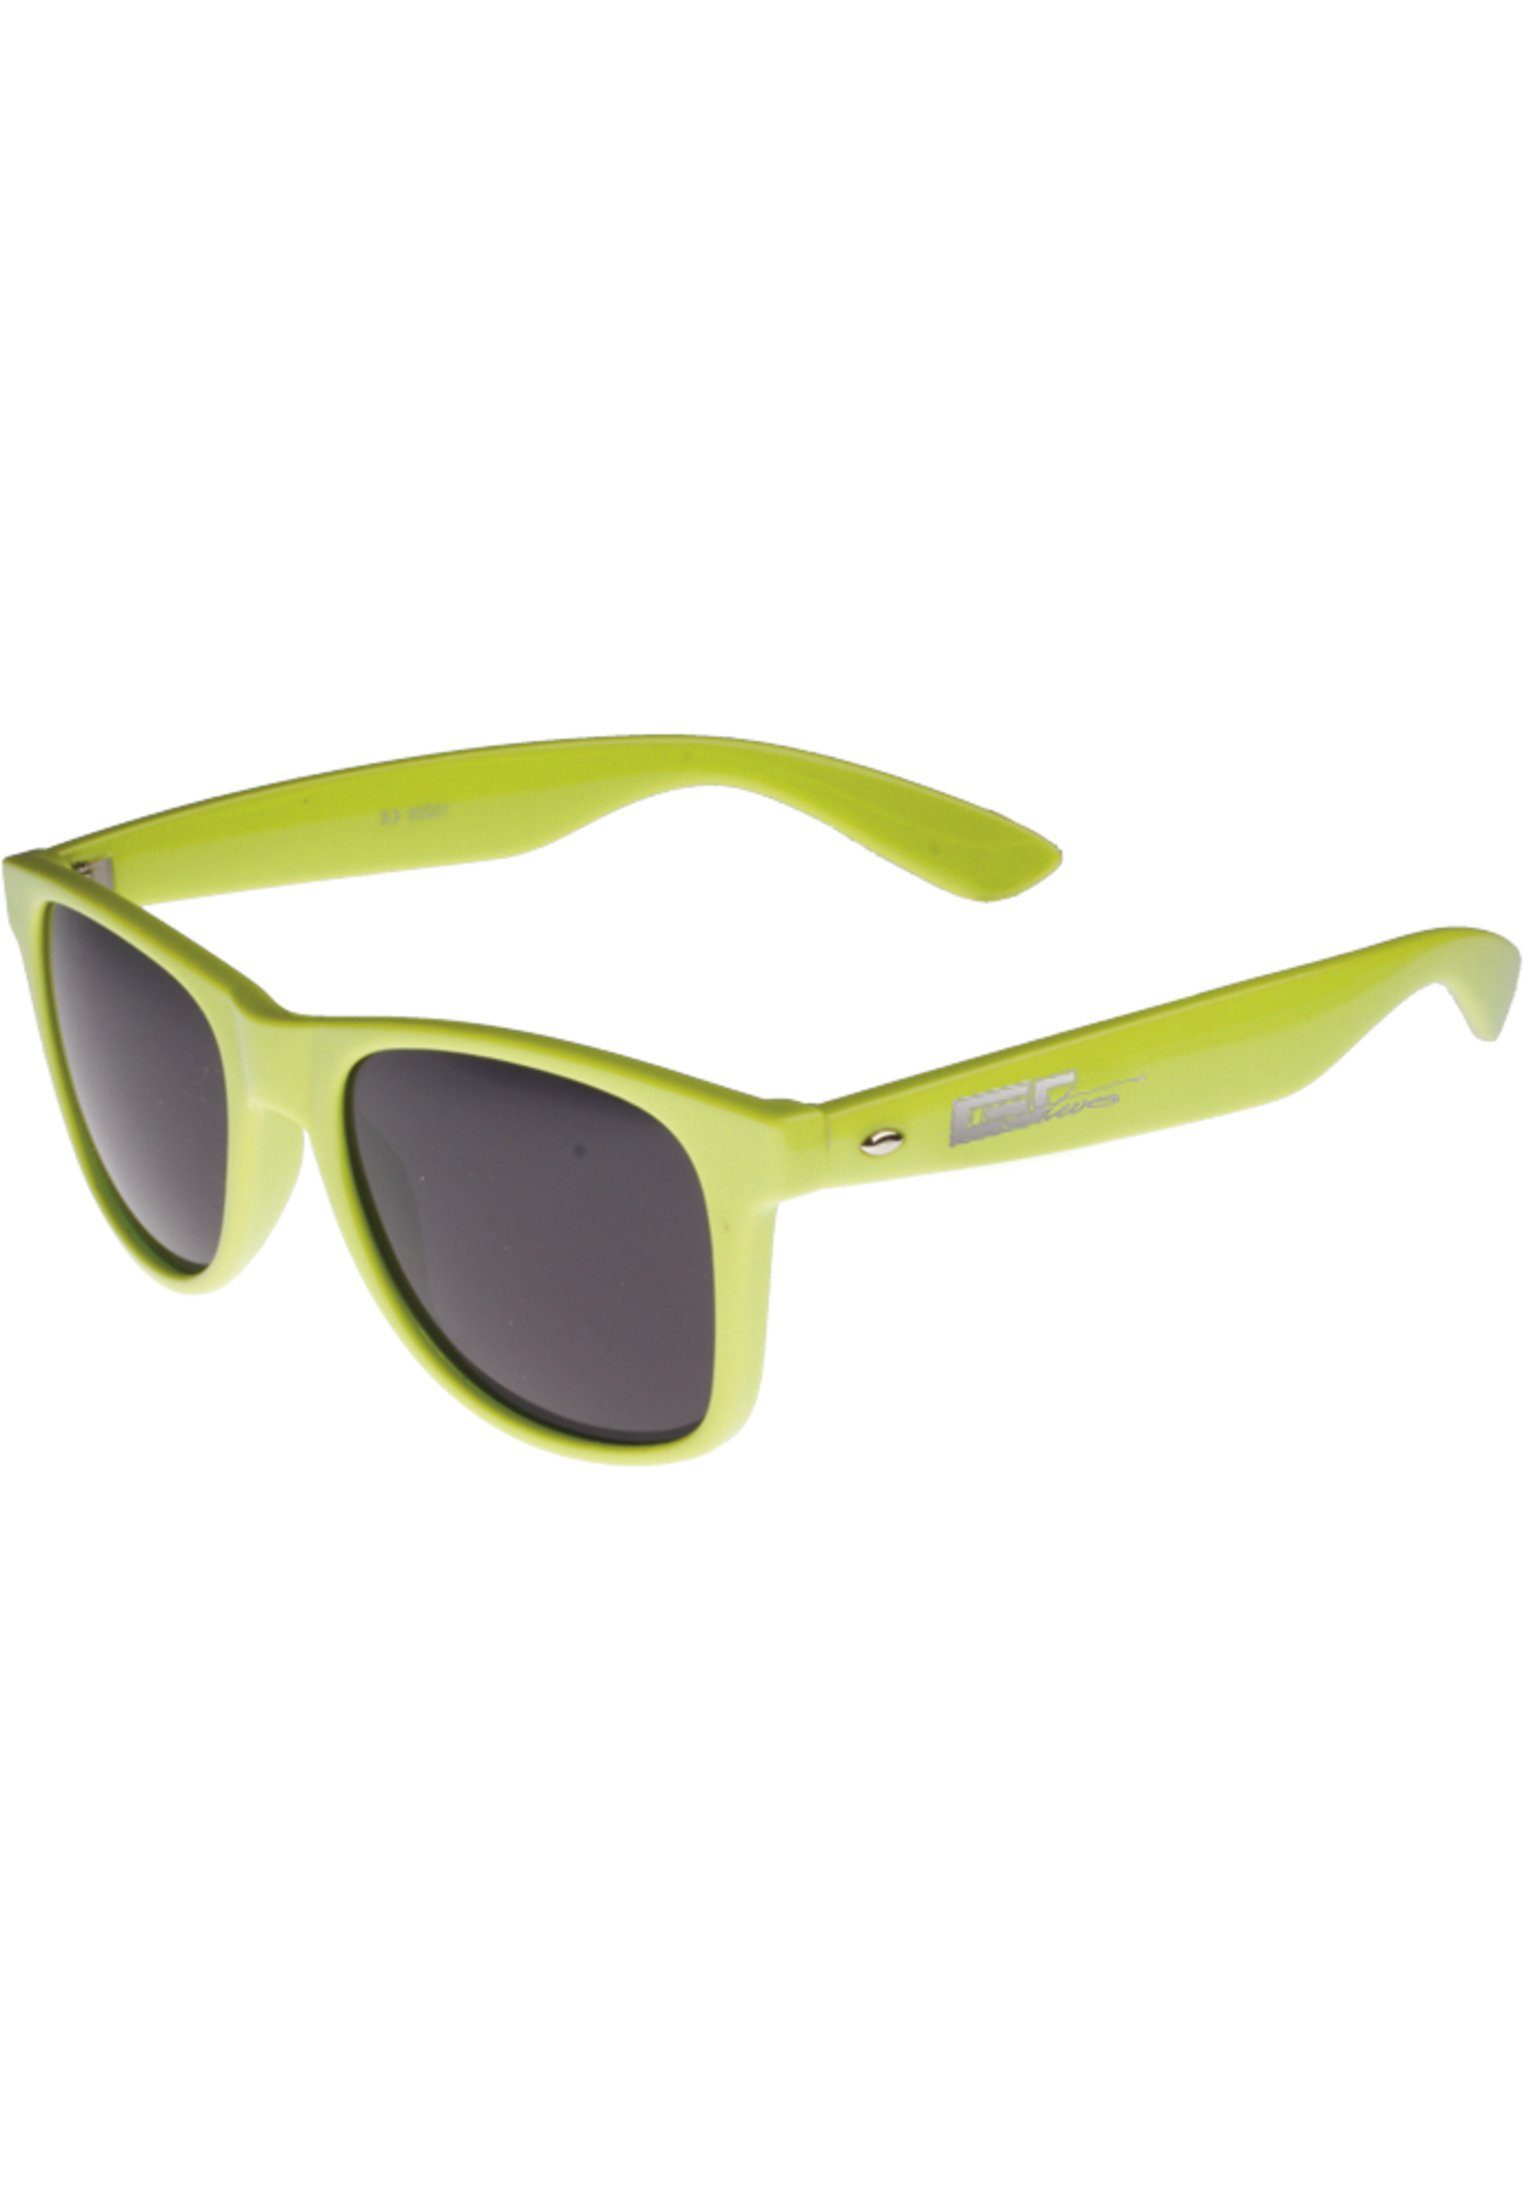 MSTRDS Accessoires GStwo Shades neongreen Groove Sonnenbrille